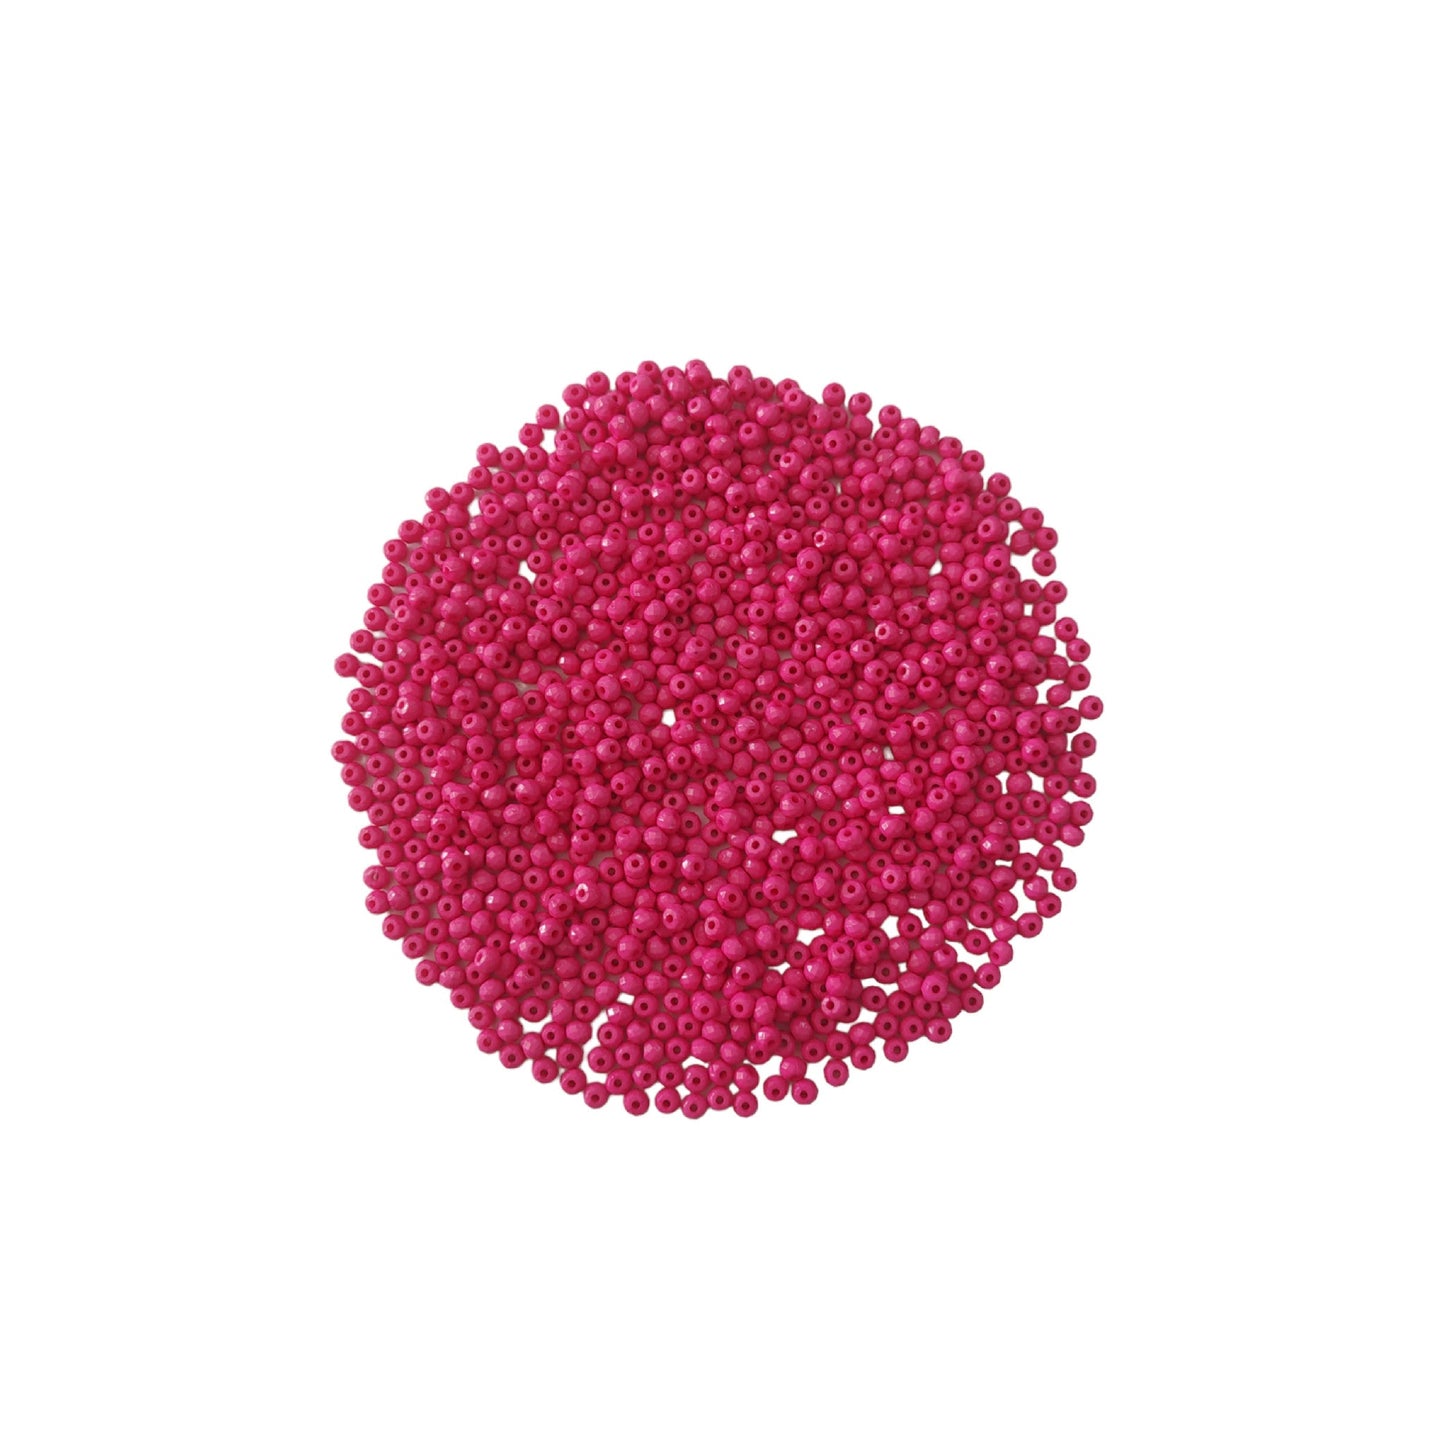 Indian Petals - Tyre shape ABS Colored Beads Ideal for Jewelry designing Craft or Decor Tyre shape ABS Colored Beads Ideal for Jewelry designing Craft or Decor - 8mm / Deep Pink / 100 Grams